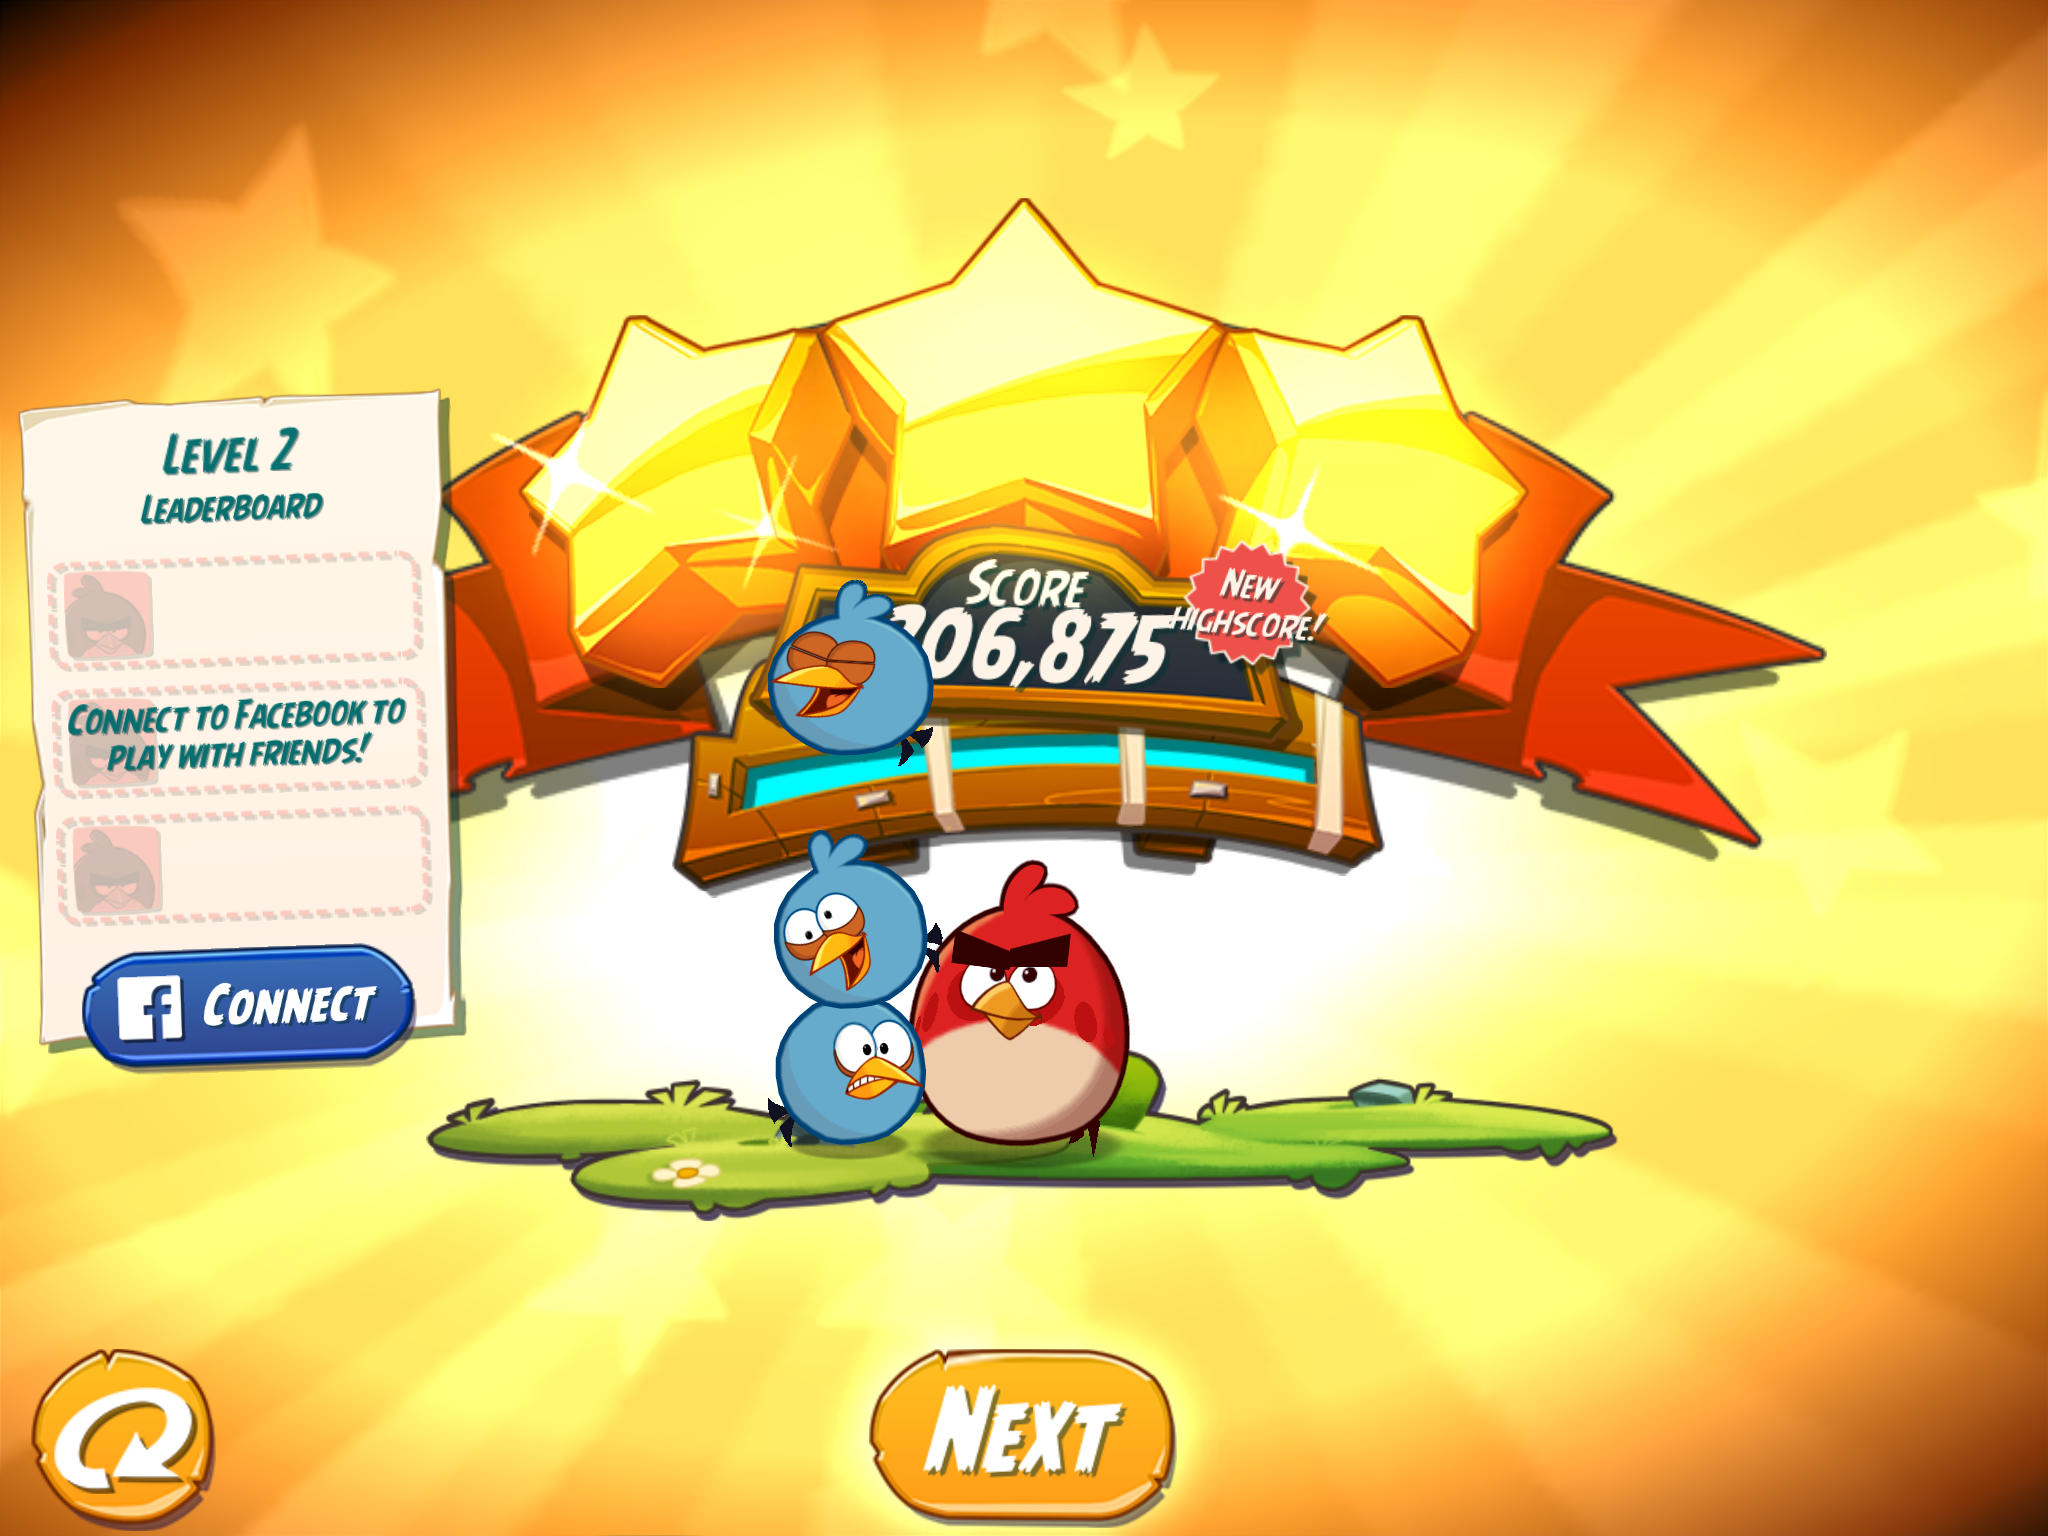 Spindy12: Angry Birds 2: Level 2 (iOS) 206,875 points on 2016-12-20 15:02:11